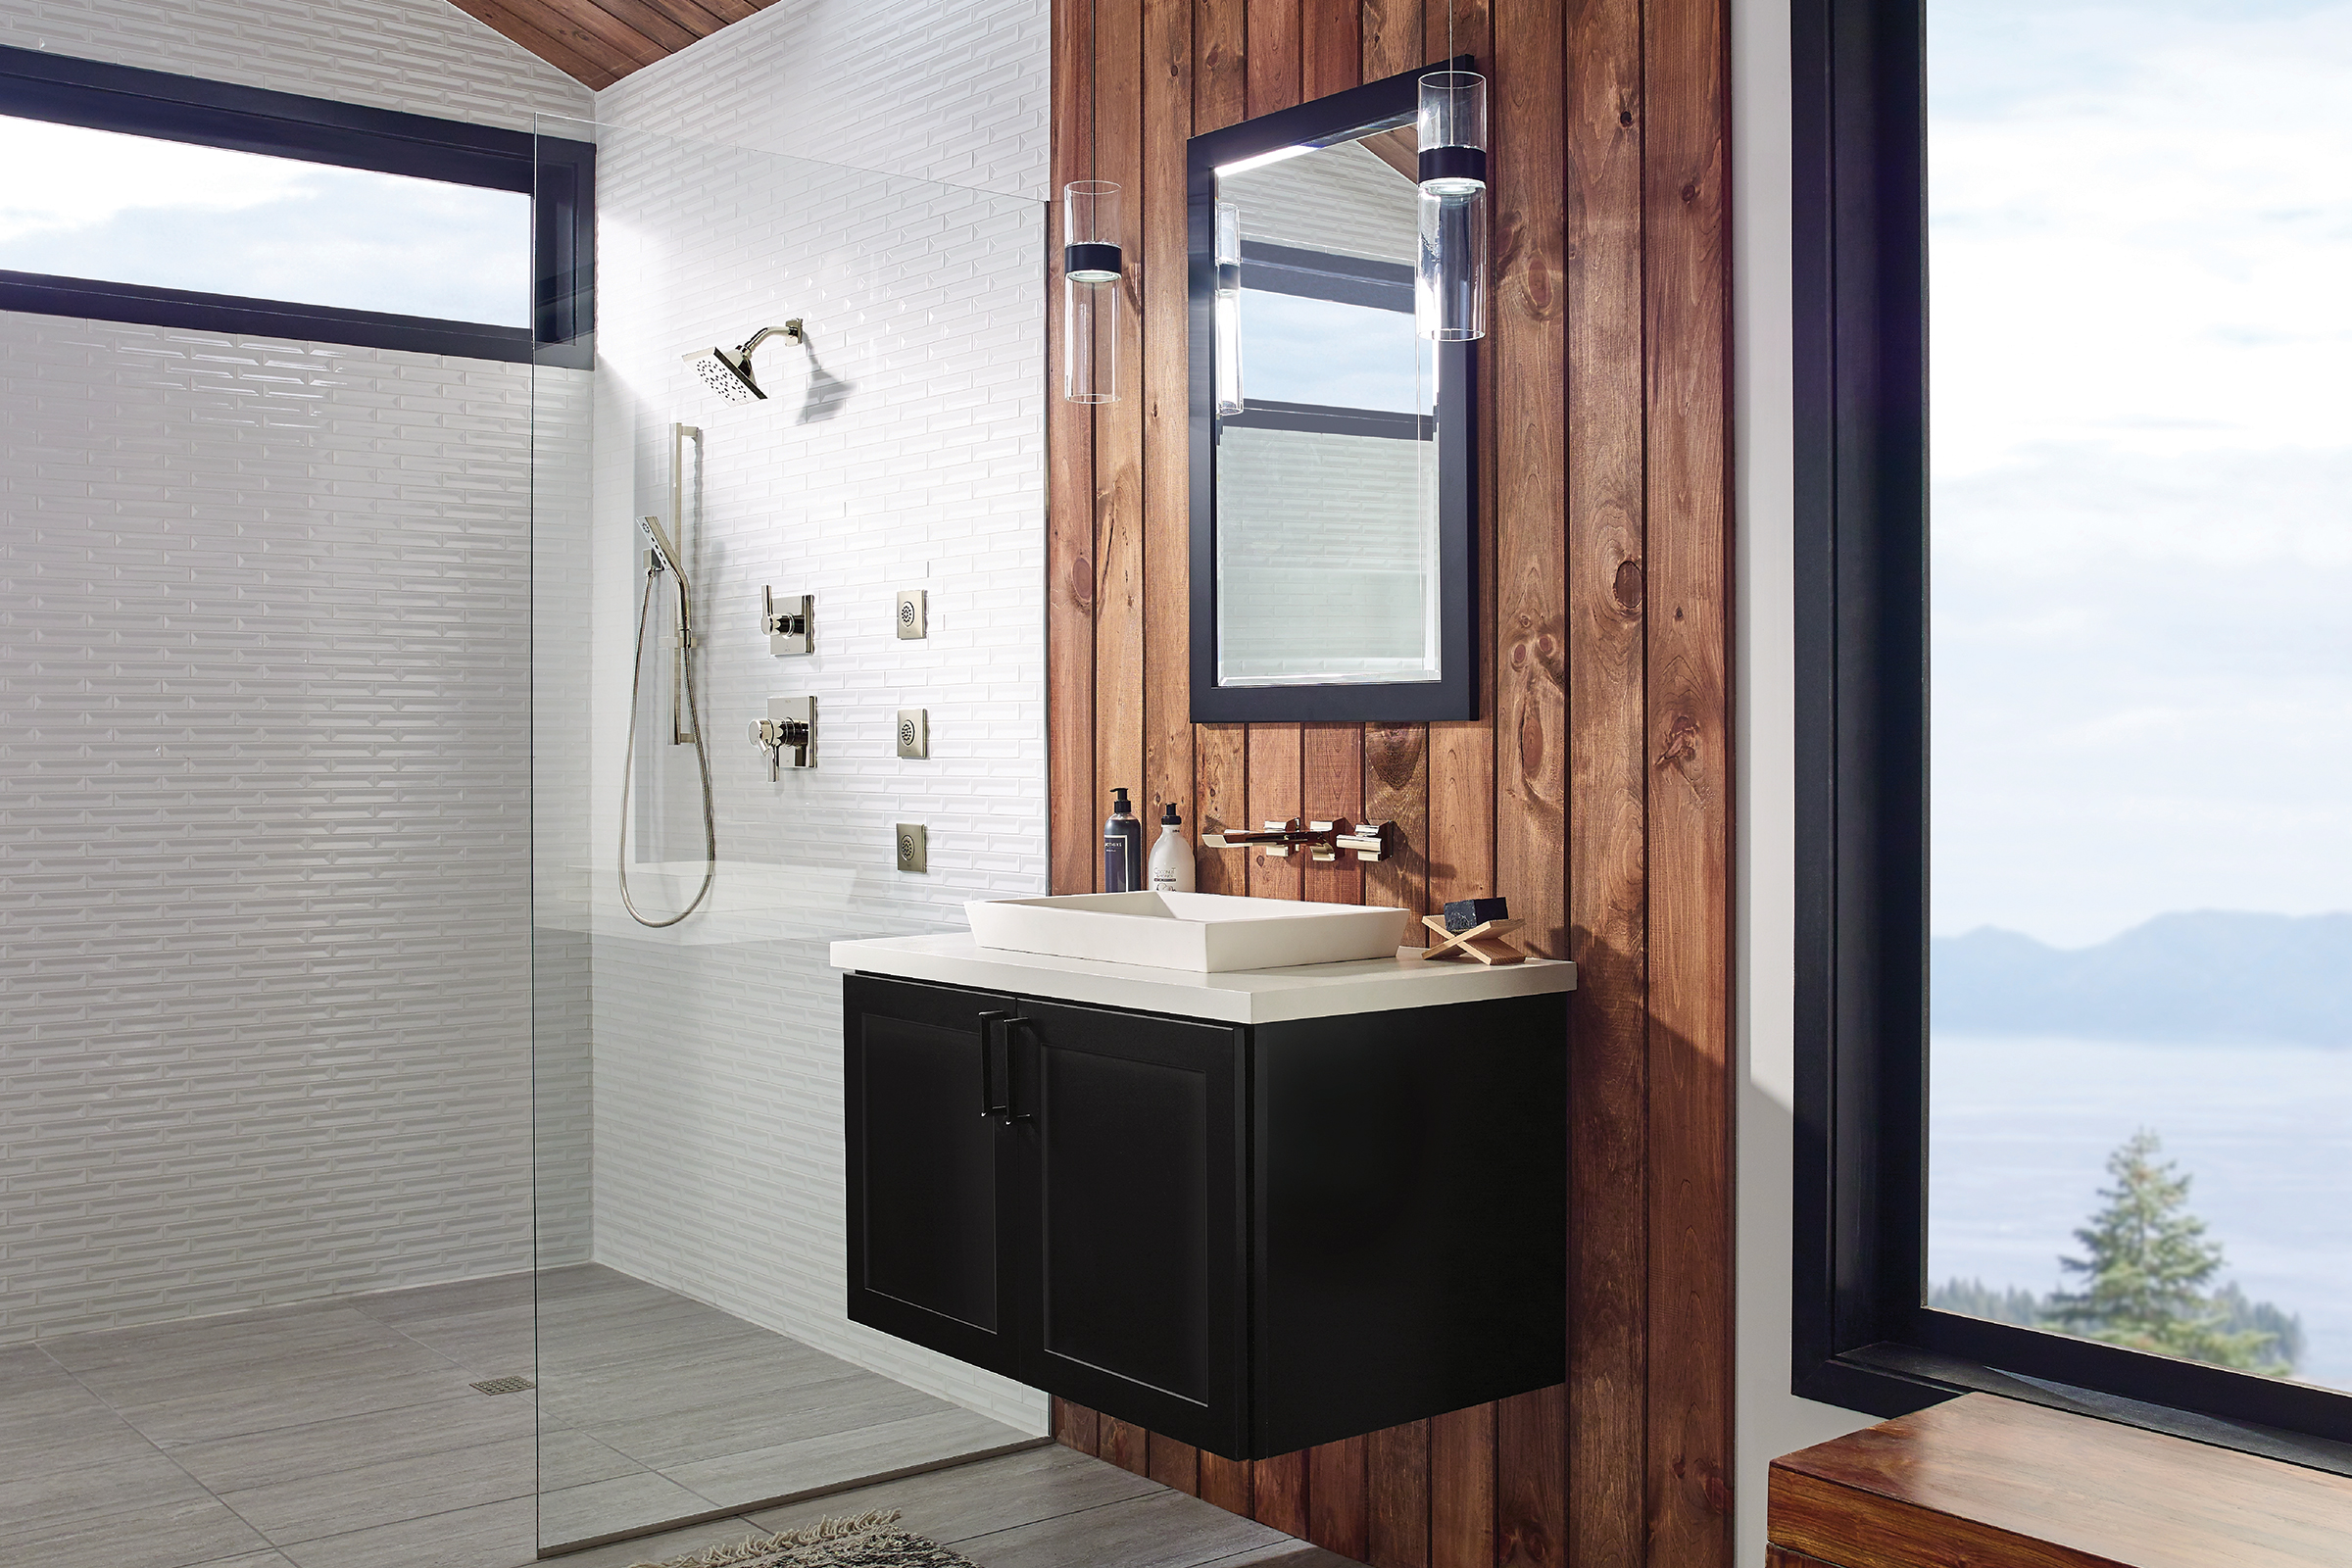 Contemporary bathroom with walk-in shower and KraftMaid floating vanity cabinets in Onyx painted finish